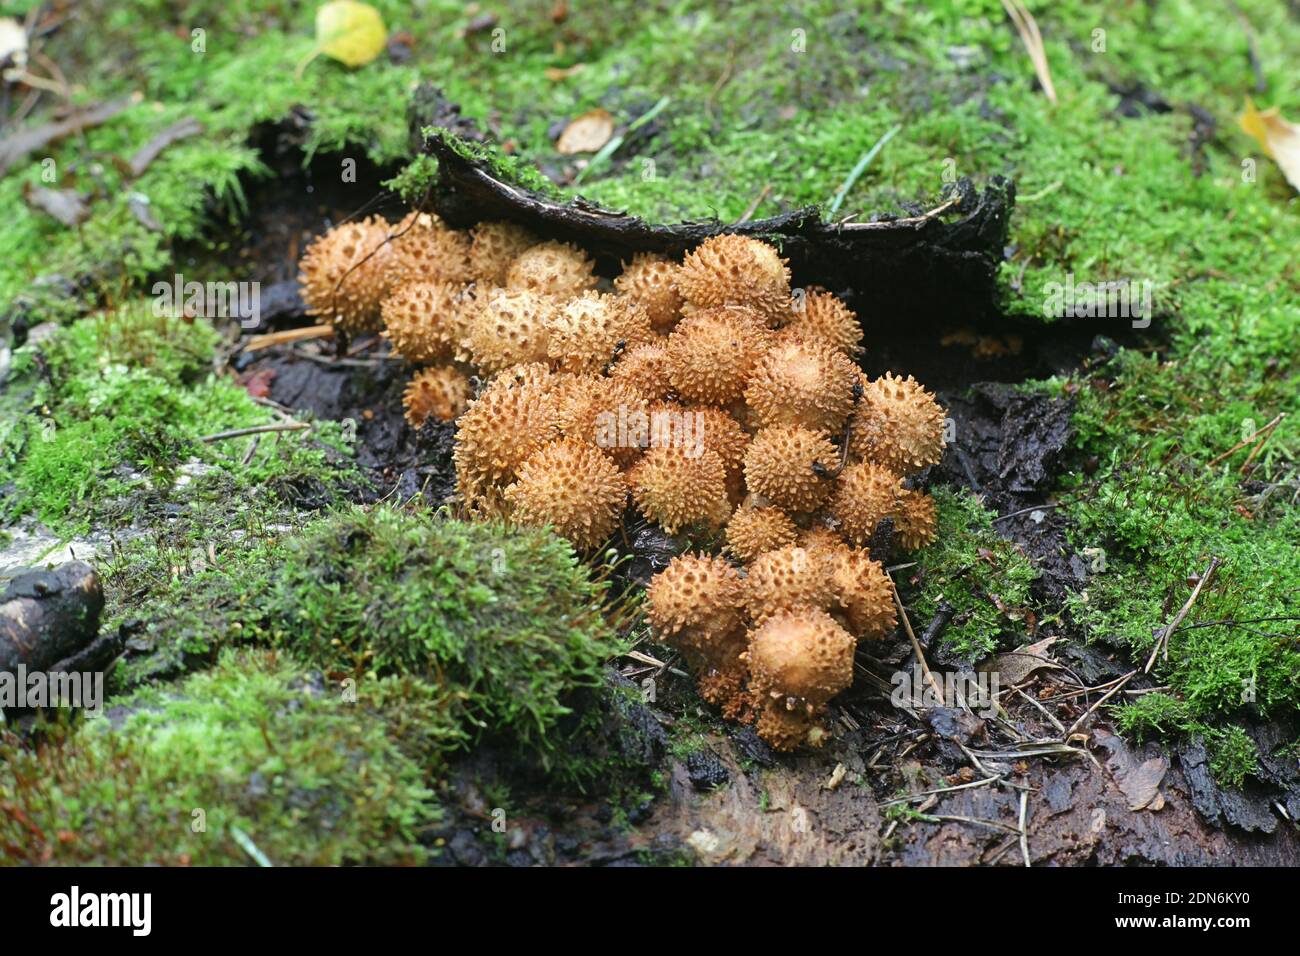 Shaggy scalycap, Pholiota squarrosa, known also as shaggy Pholiota, or scaly Pholiota, wild mushroom from Finland Stock Photo